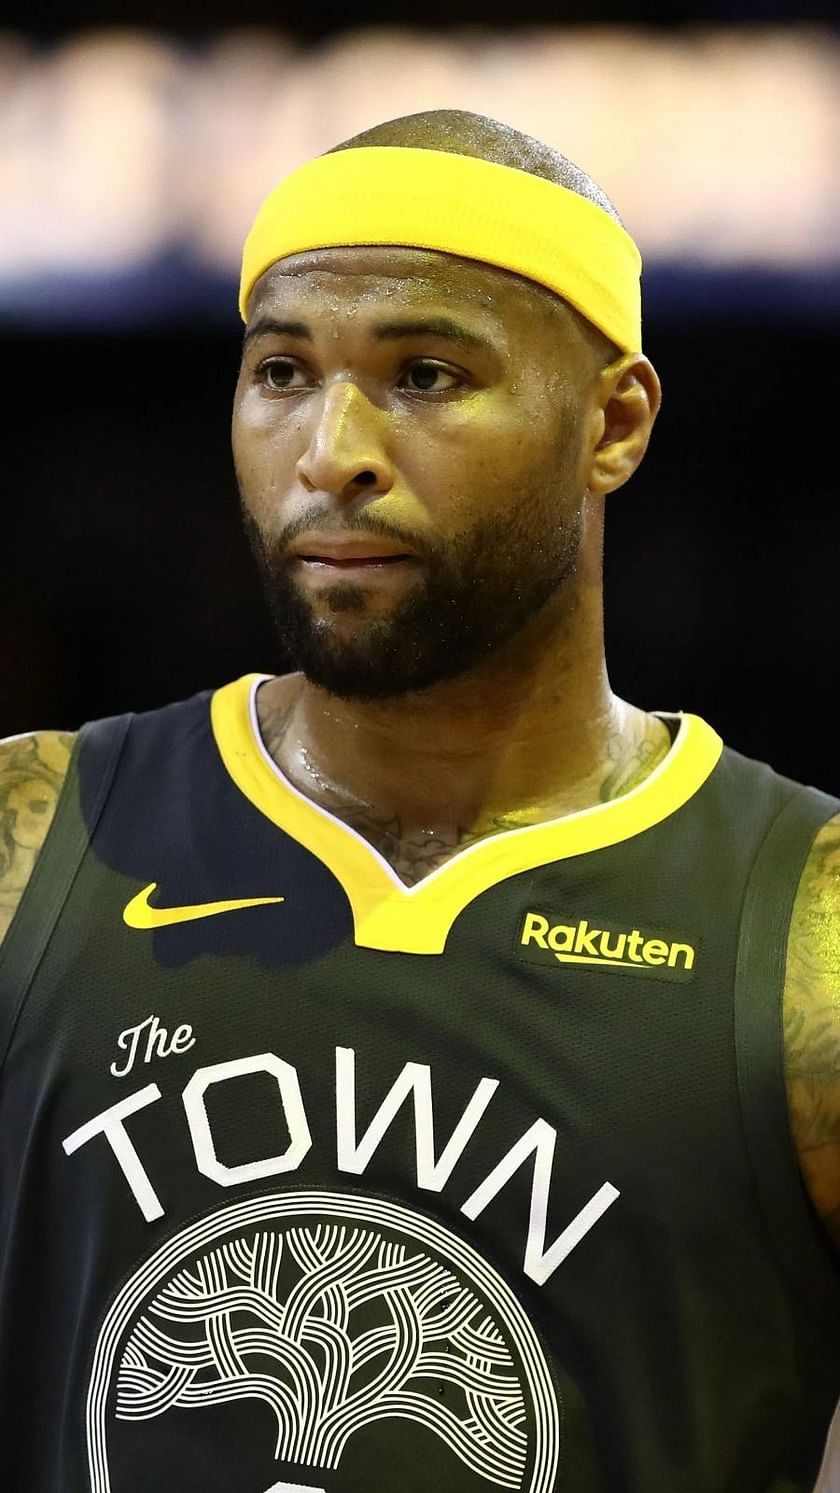 DeMarcus Cousins set to sign non-guaranteed contract with Bucks